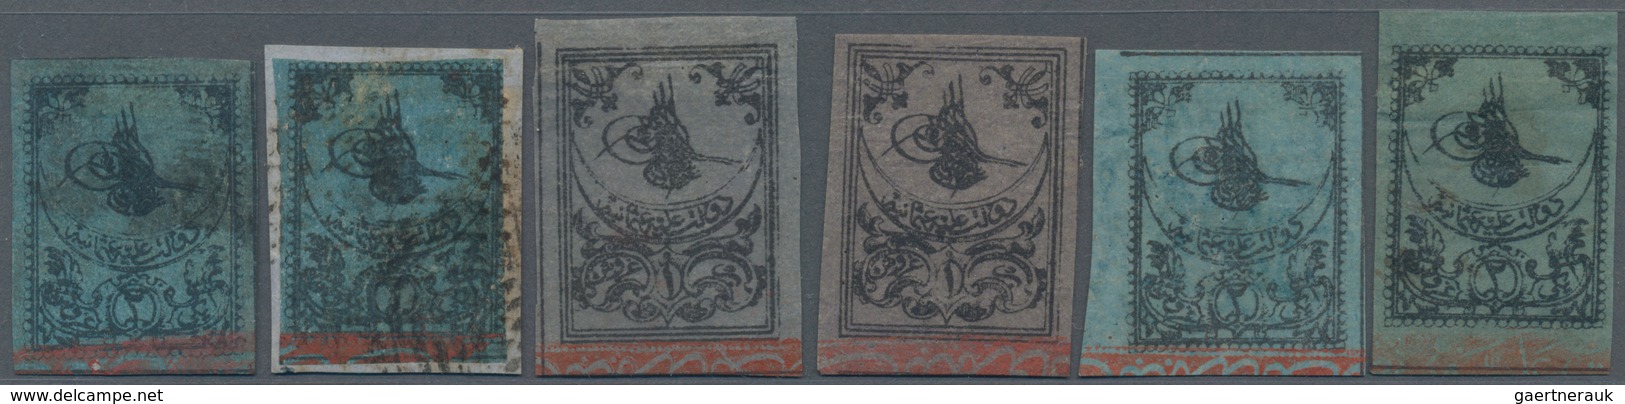 Türkei: 1863-1930, Small Lot Of 11 First Issues "Tughra" And Few Republic Stamps Up To Atatürk, Fine - Used Stamps